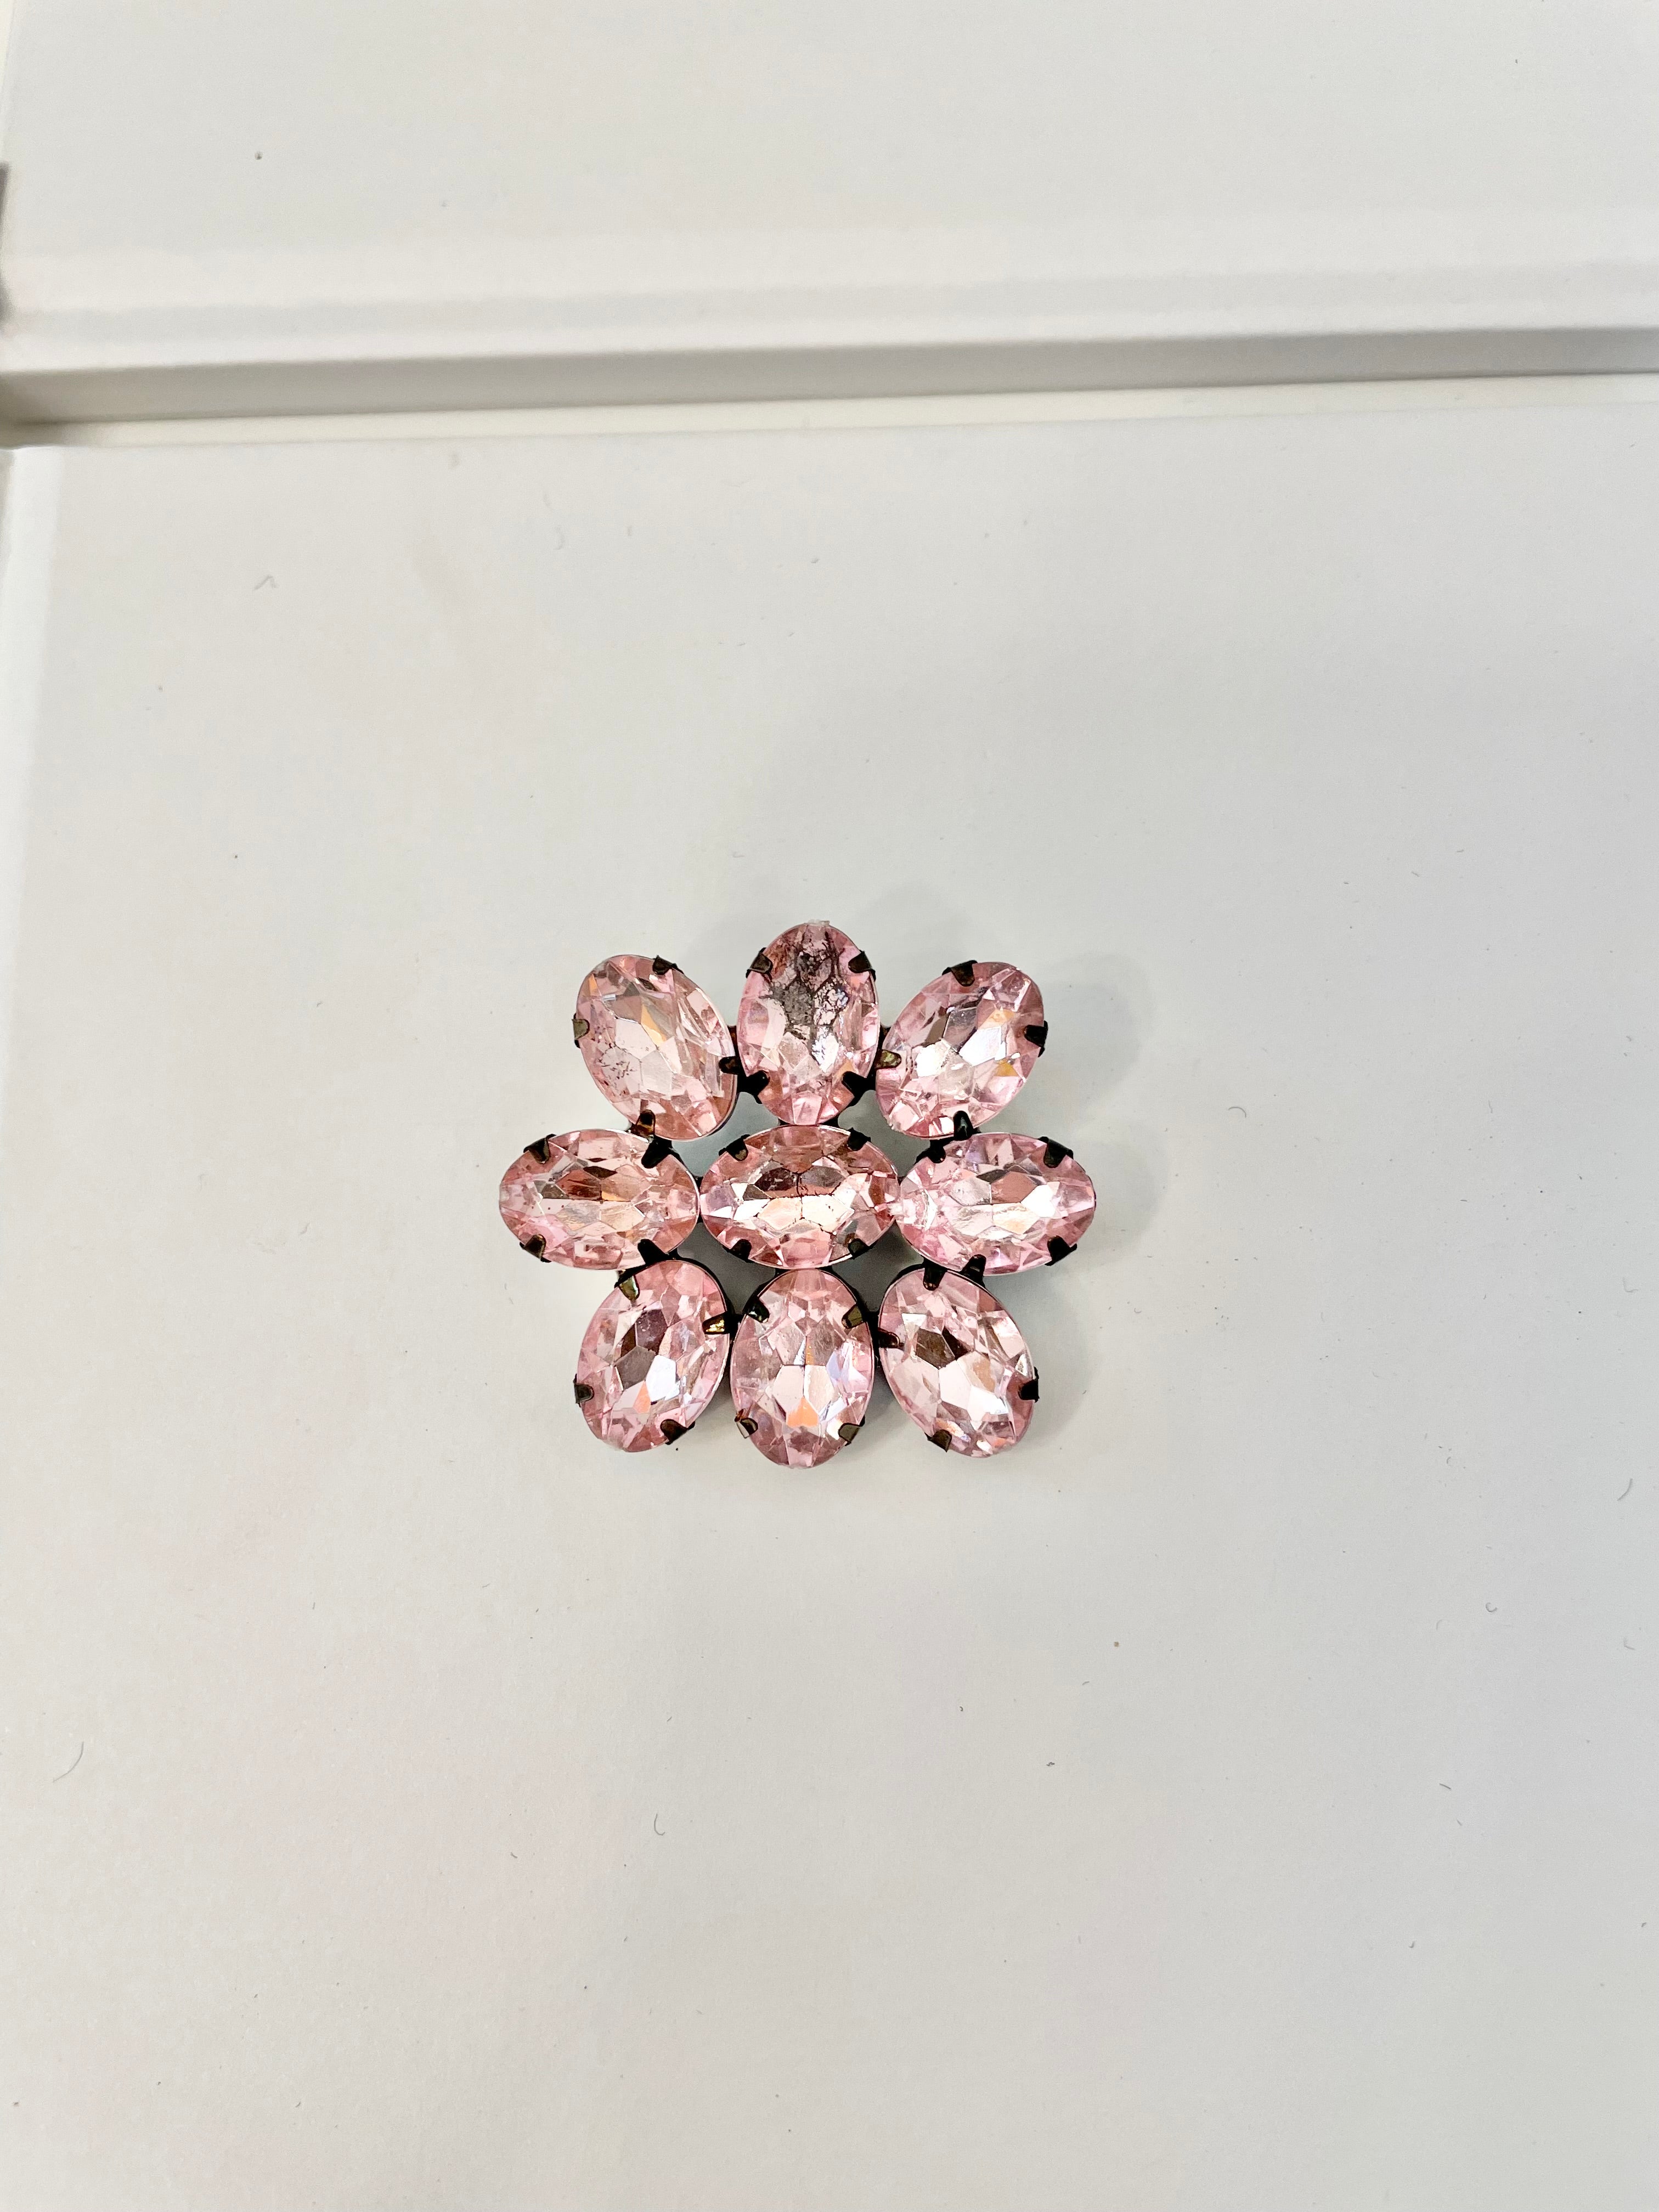 The Flirty gal and her love a pretty pink brooch. This 1980's divine brooch is pure perfection1